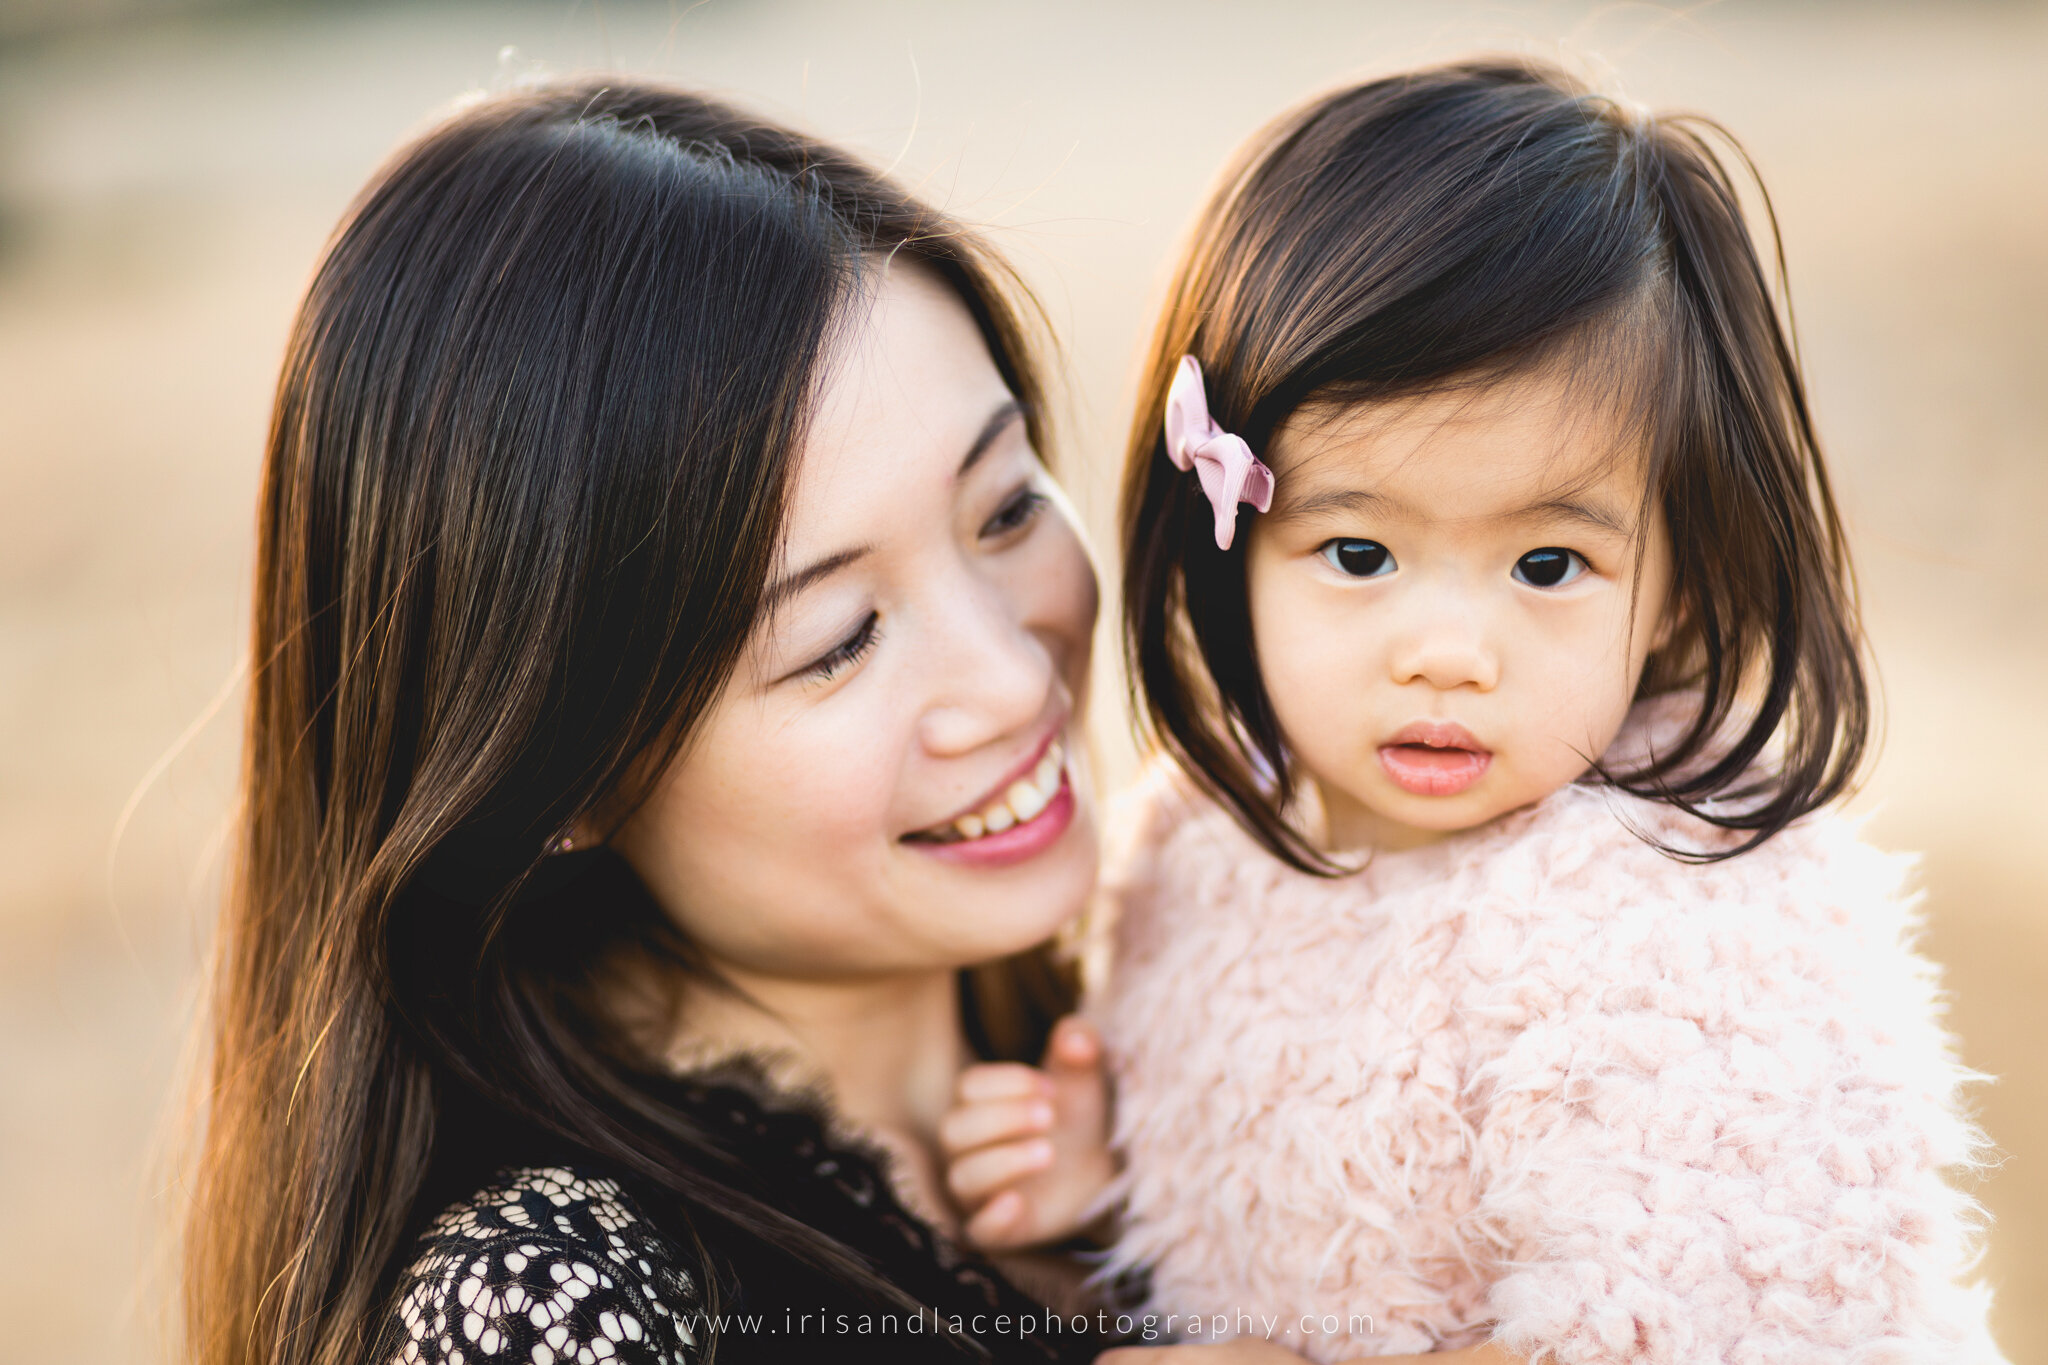 Indoor Lifestyle Gallery and Outdoor Family Photos in SF Bay Area Peninsula